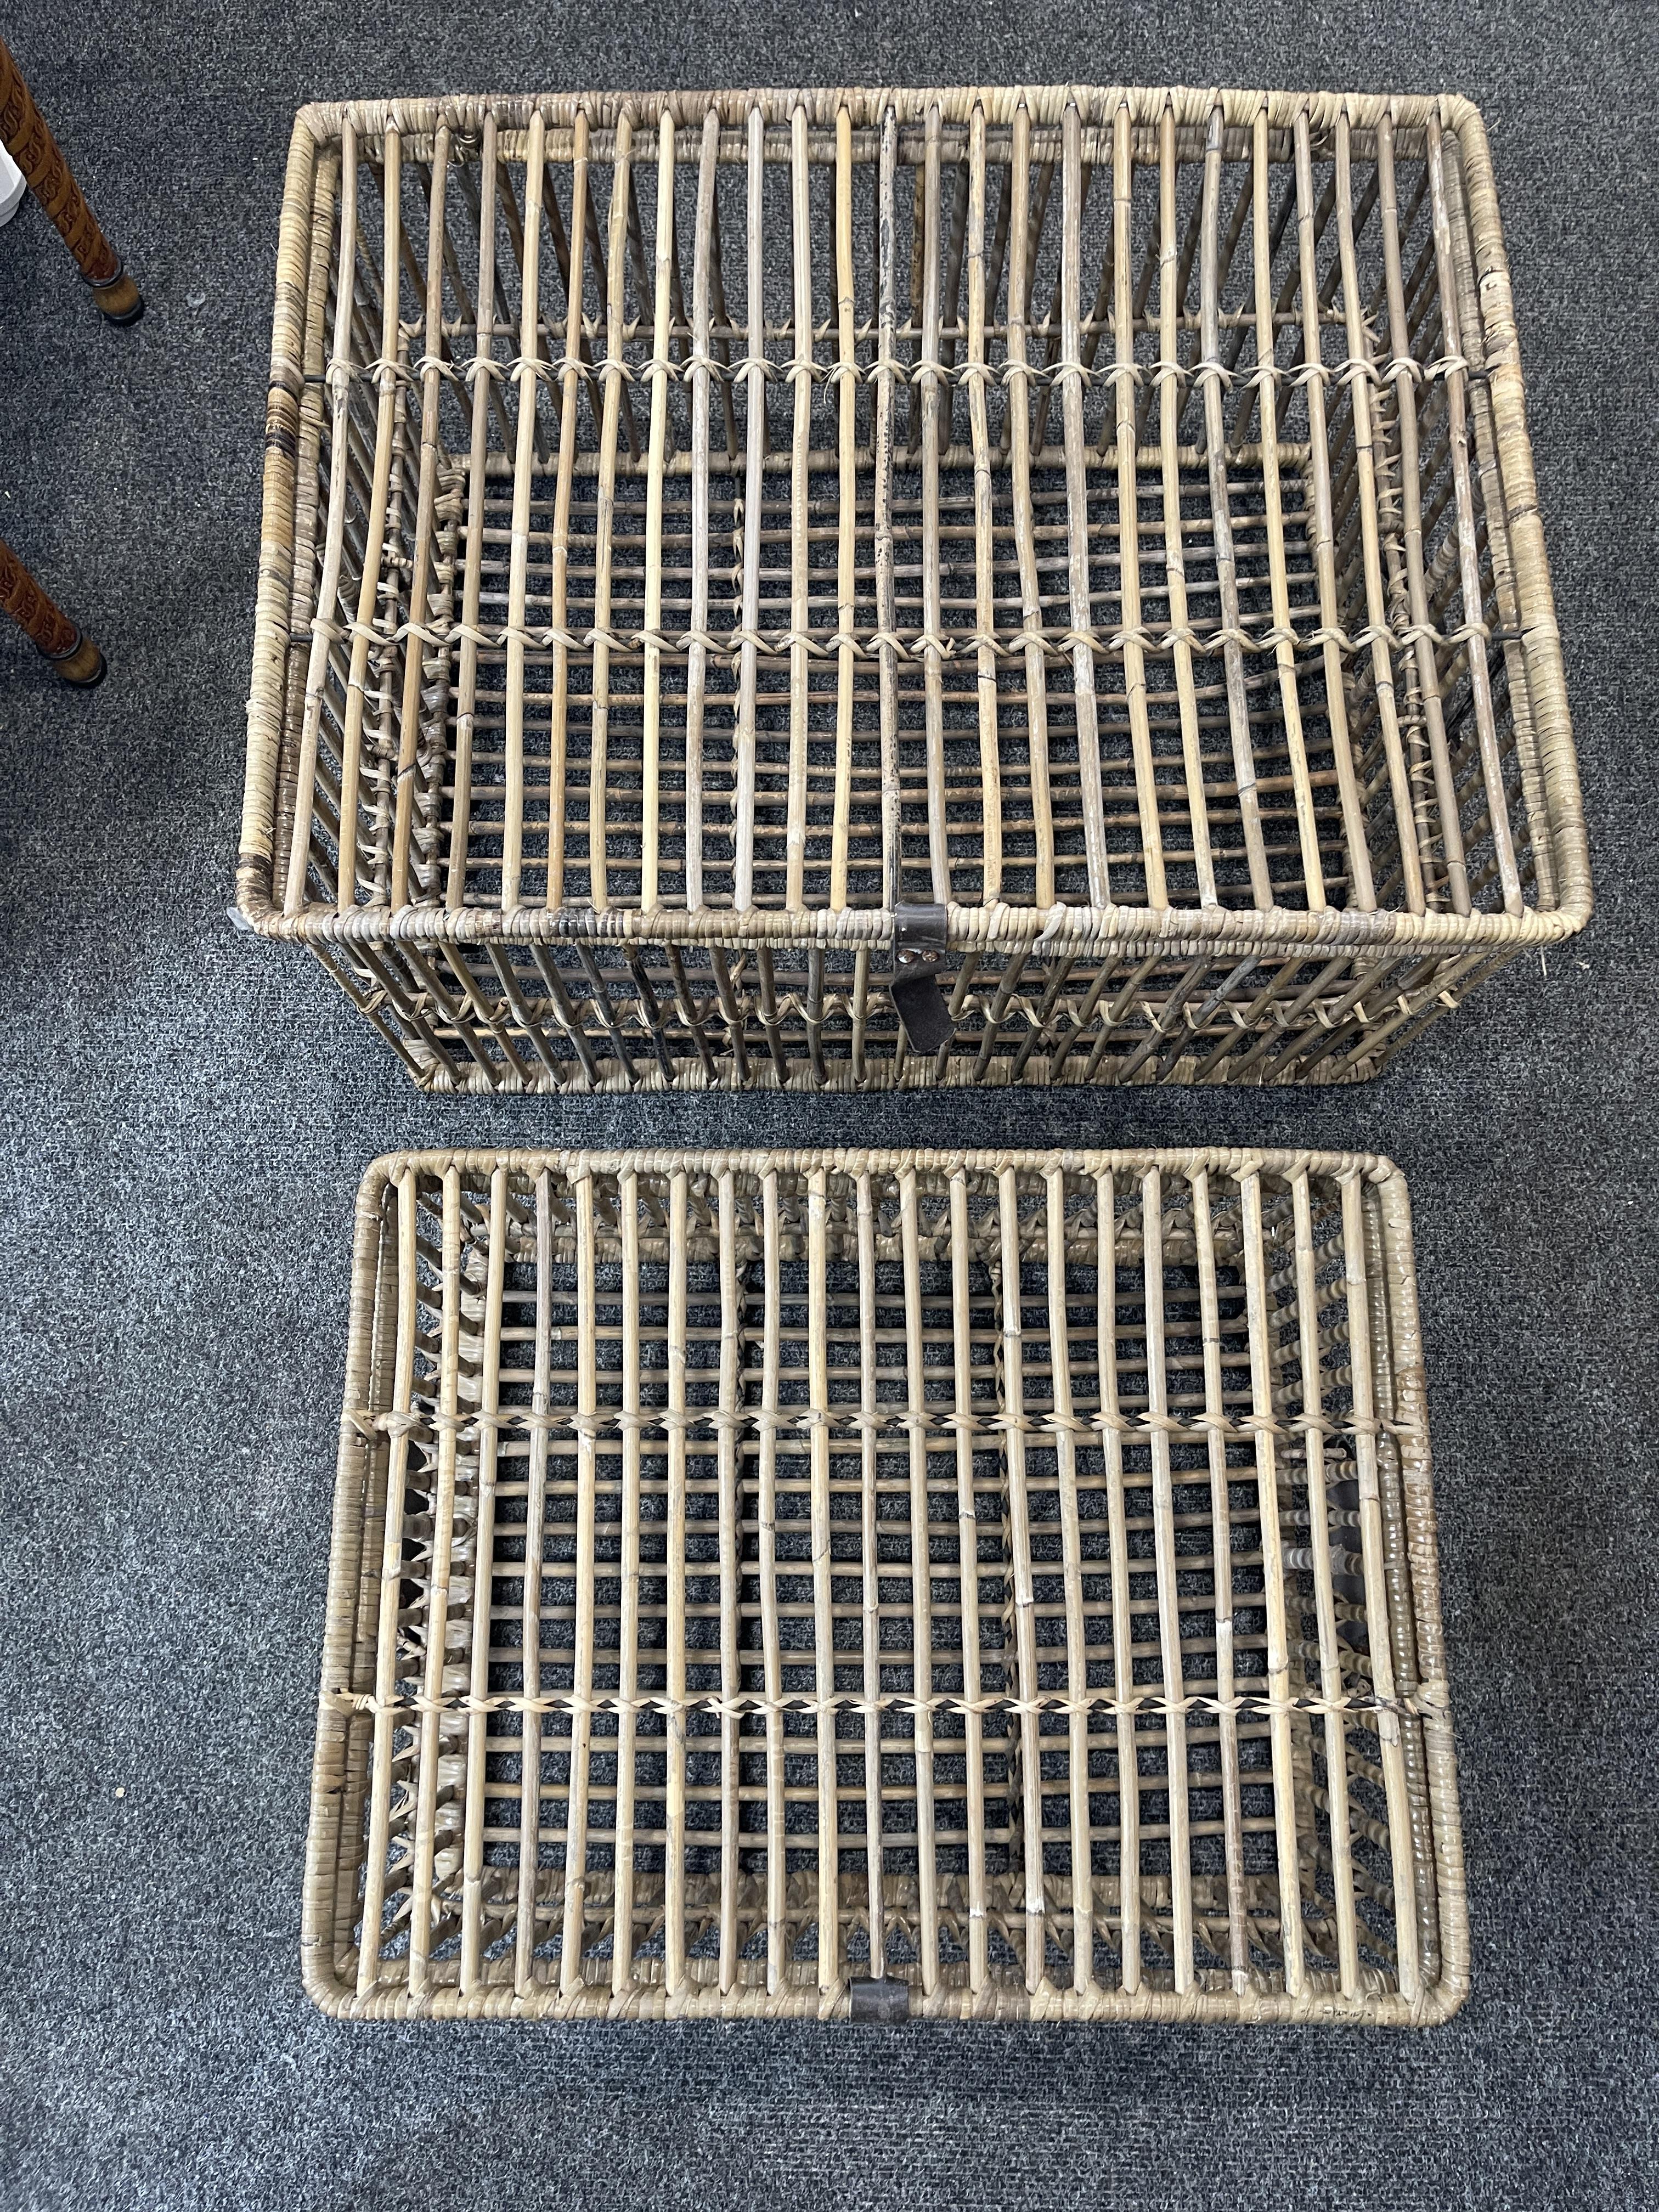 Two Large Vintage Rattan Trunks. - Image 10 of 10